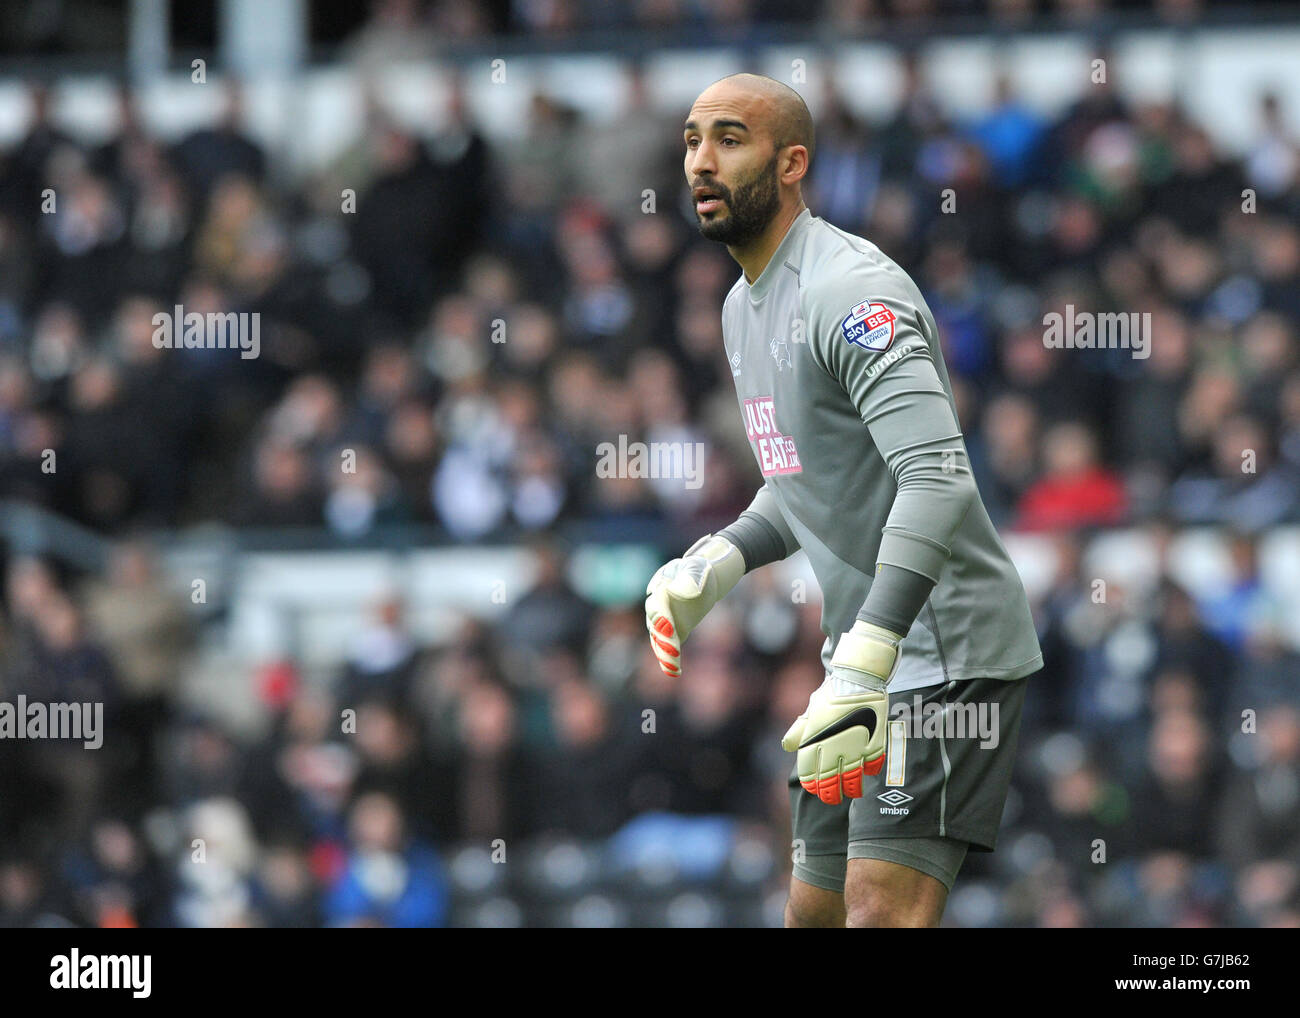 Fußball - Sky Bet Championship - Derby County / Norwich City - iPro Stadium. Derby County Torwart Lee Grant Stockfoto